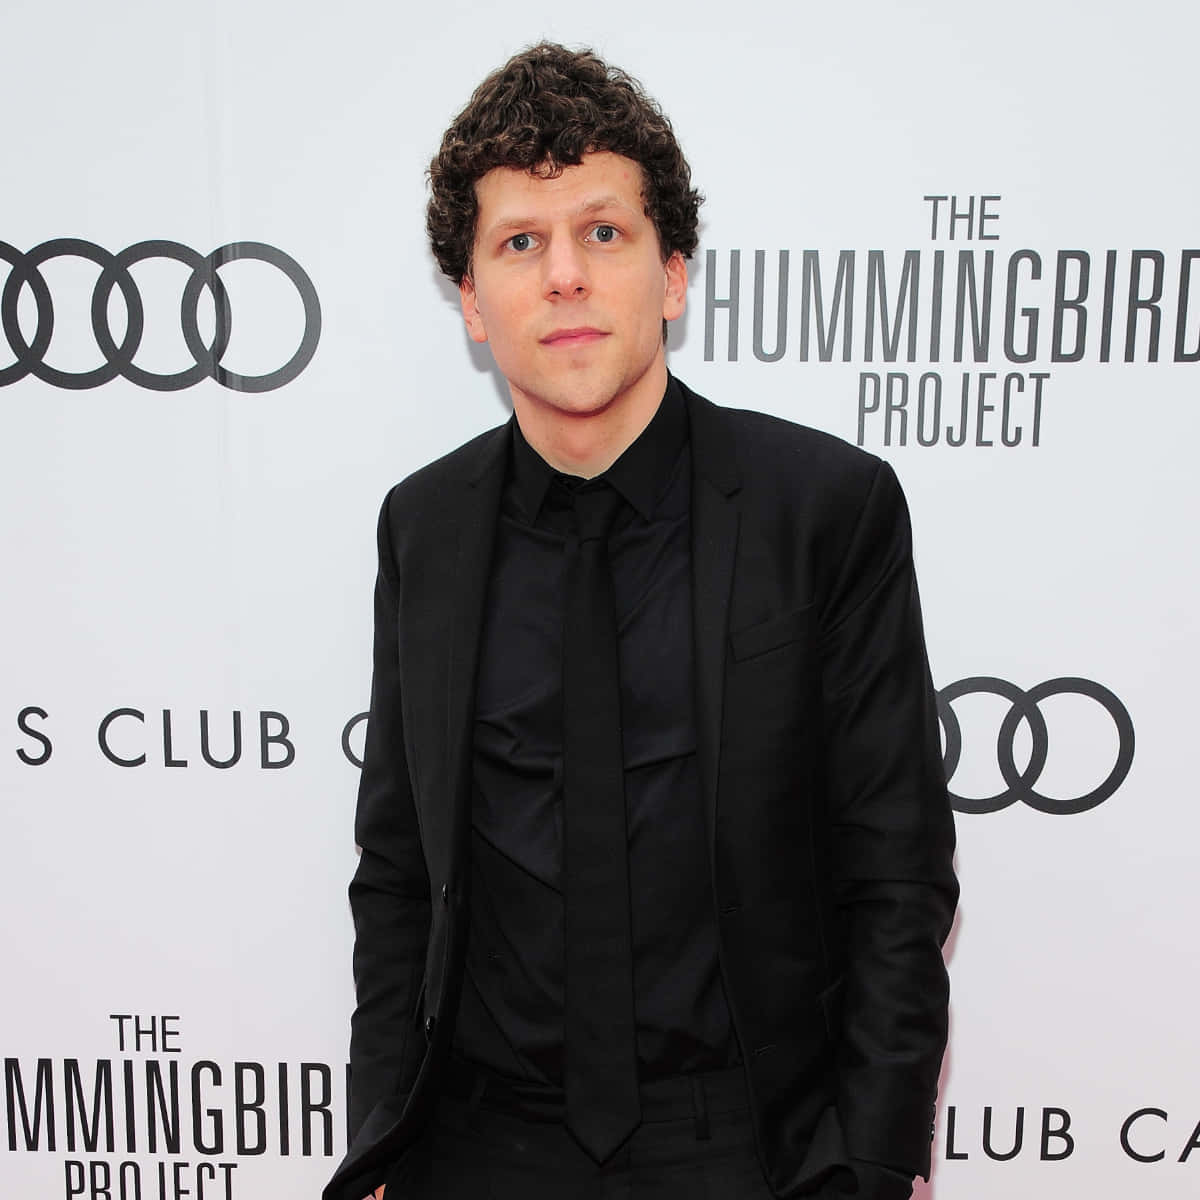 Jesseeisenberg Is Not A Sentence Related To Computer Or Mobile Wallpaper. Could You Please Provide A Sentence Related To Computer Or Mobile Wallpaper? Fondo de pantalla